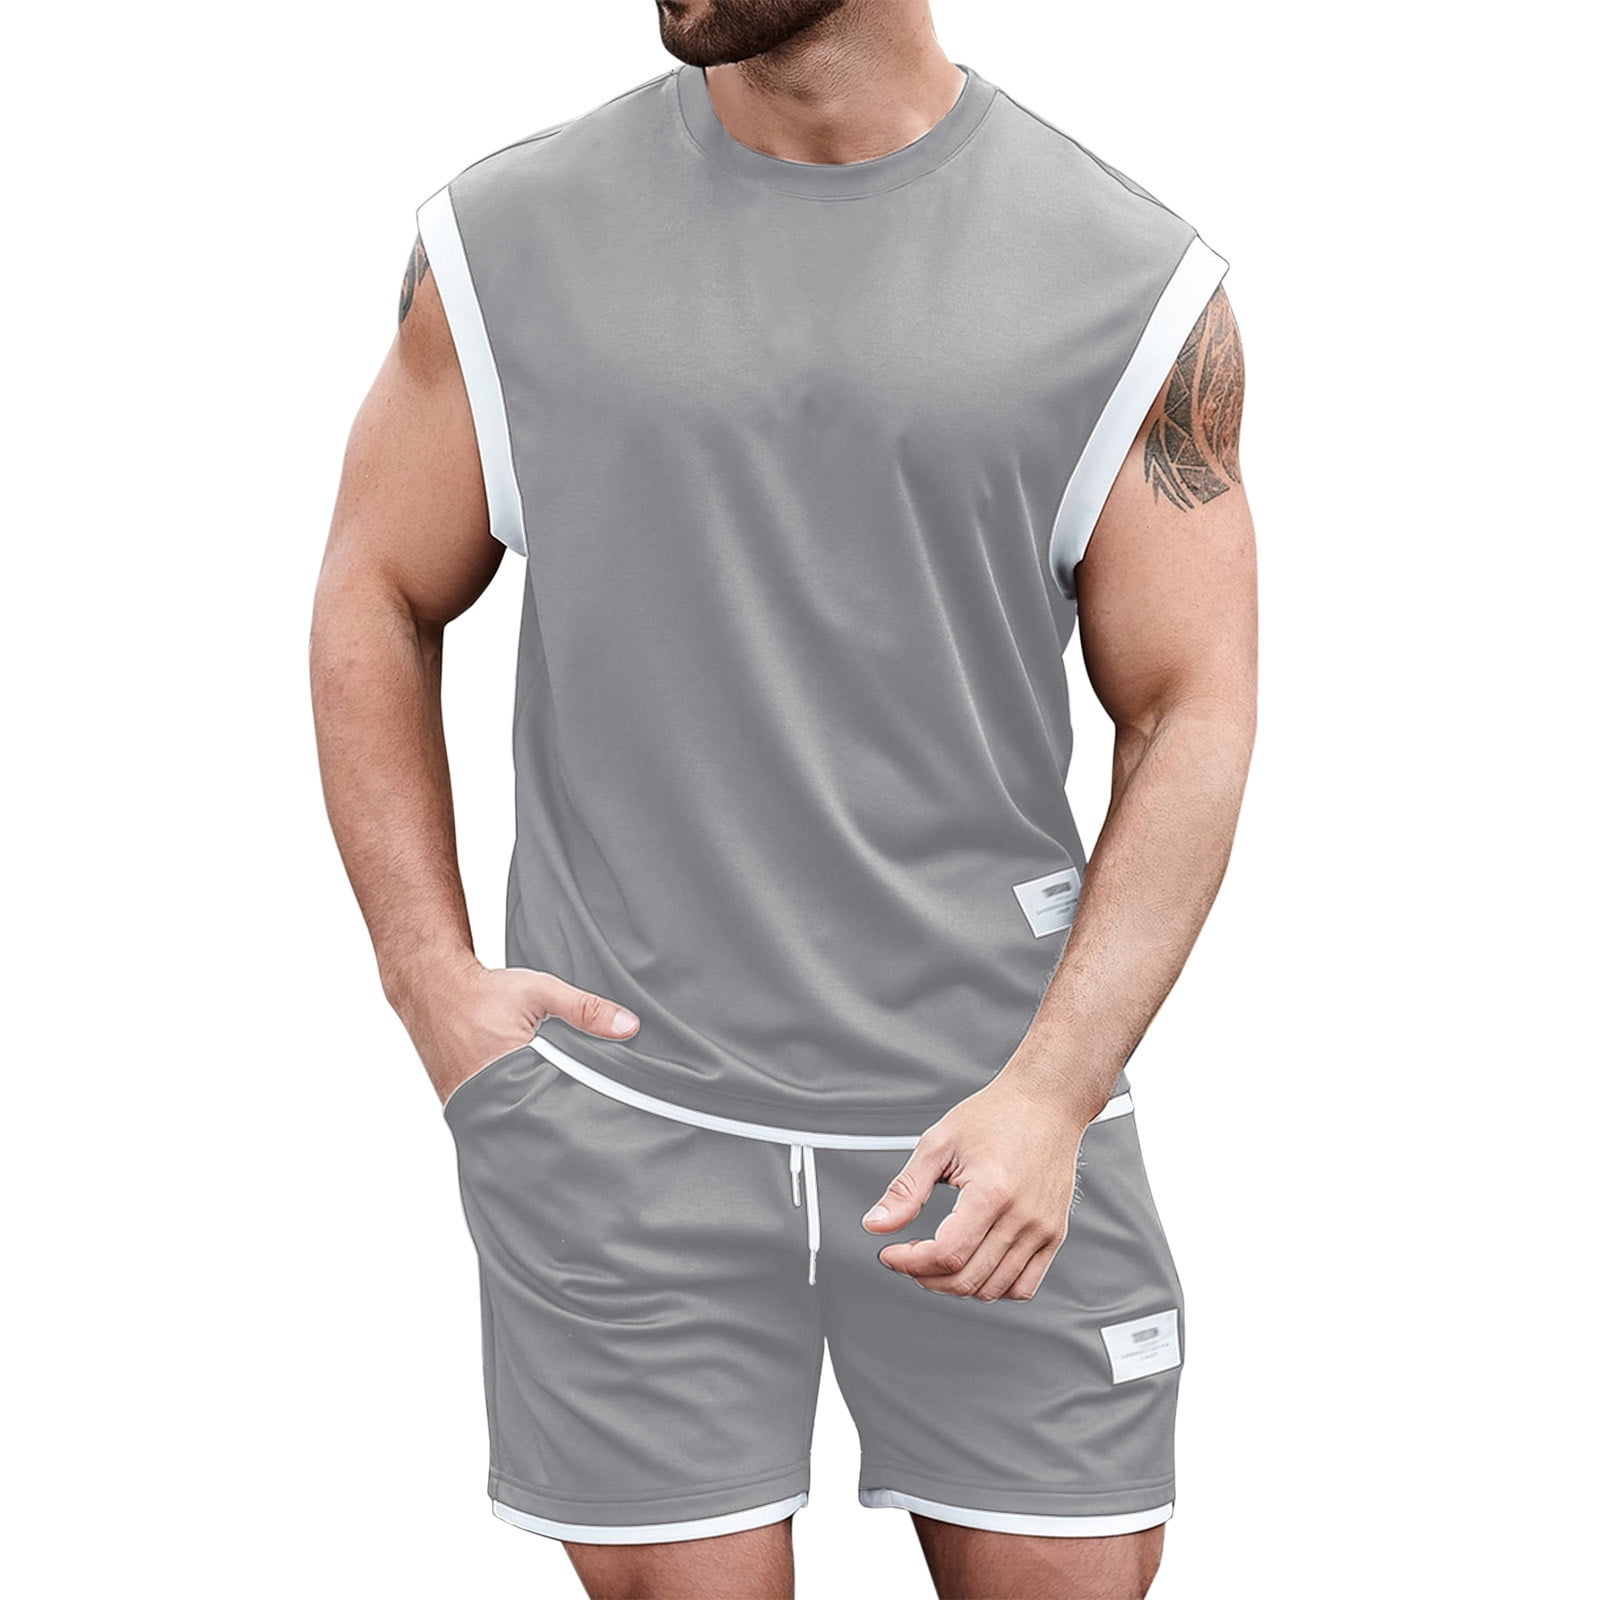 YanHoo Men's 2 Piece Tracksuits Sleevless Vest Tank Tops with Shorts ...